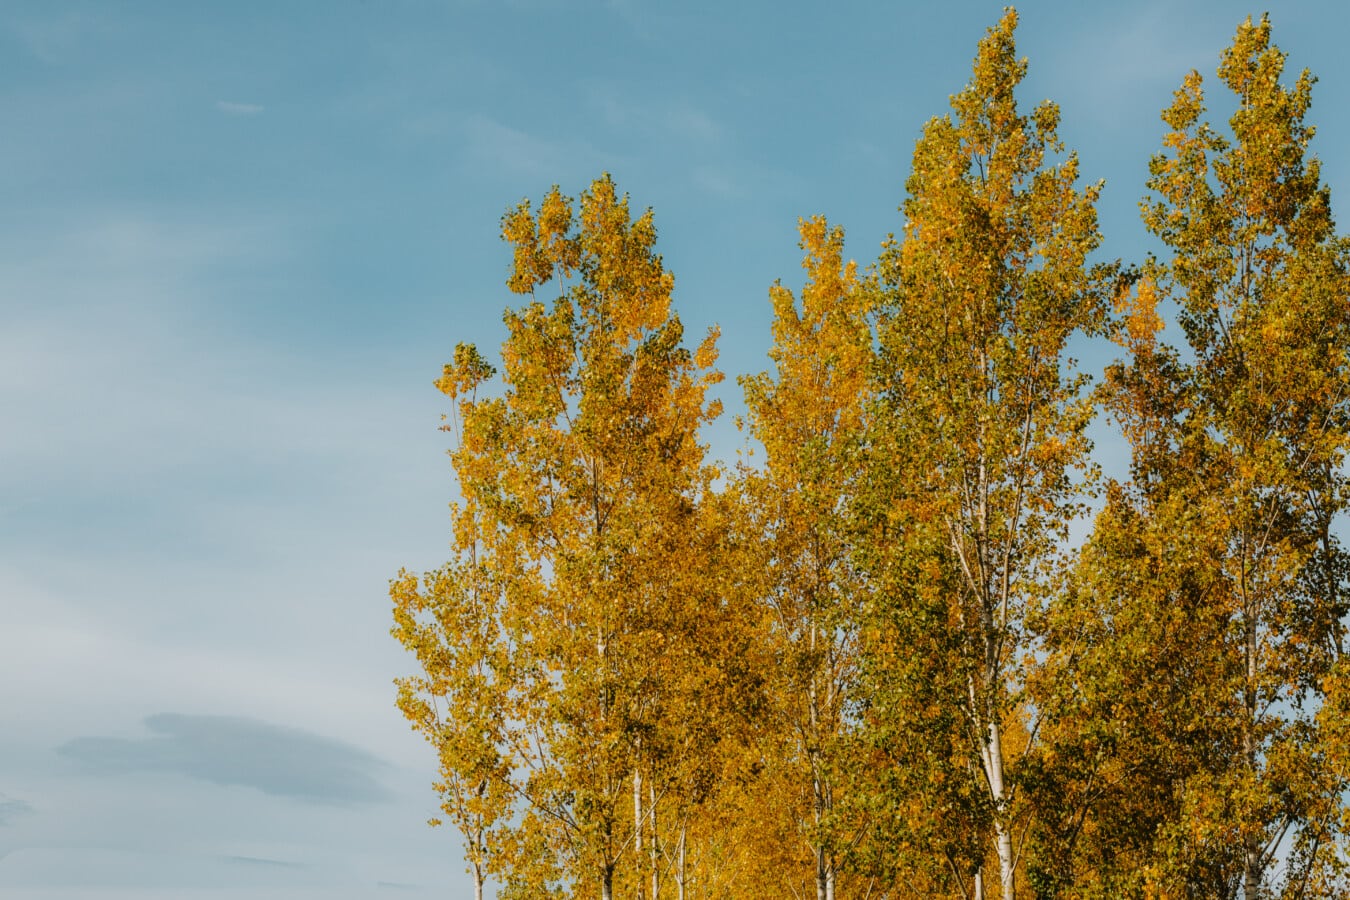 poplar, trees, yellowish brown, leaves, branches, high, autumn, season, yellow, forest